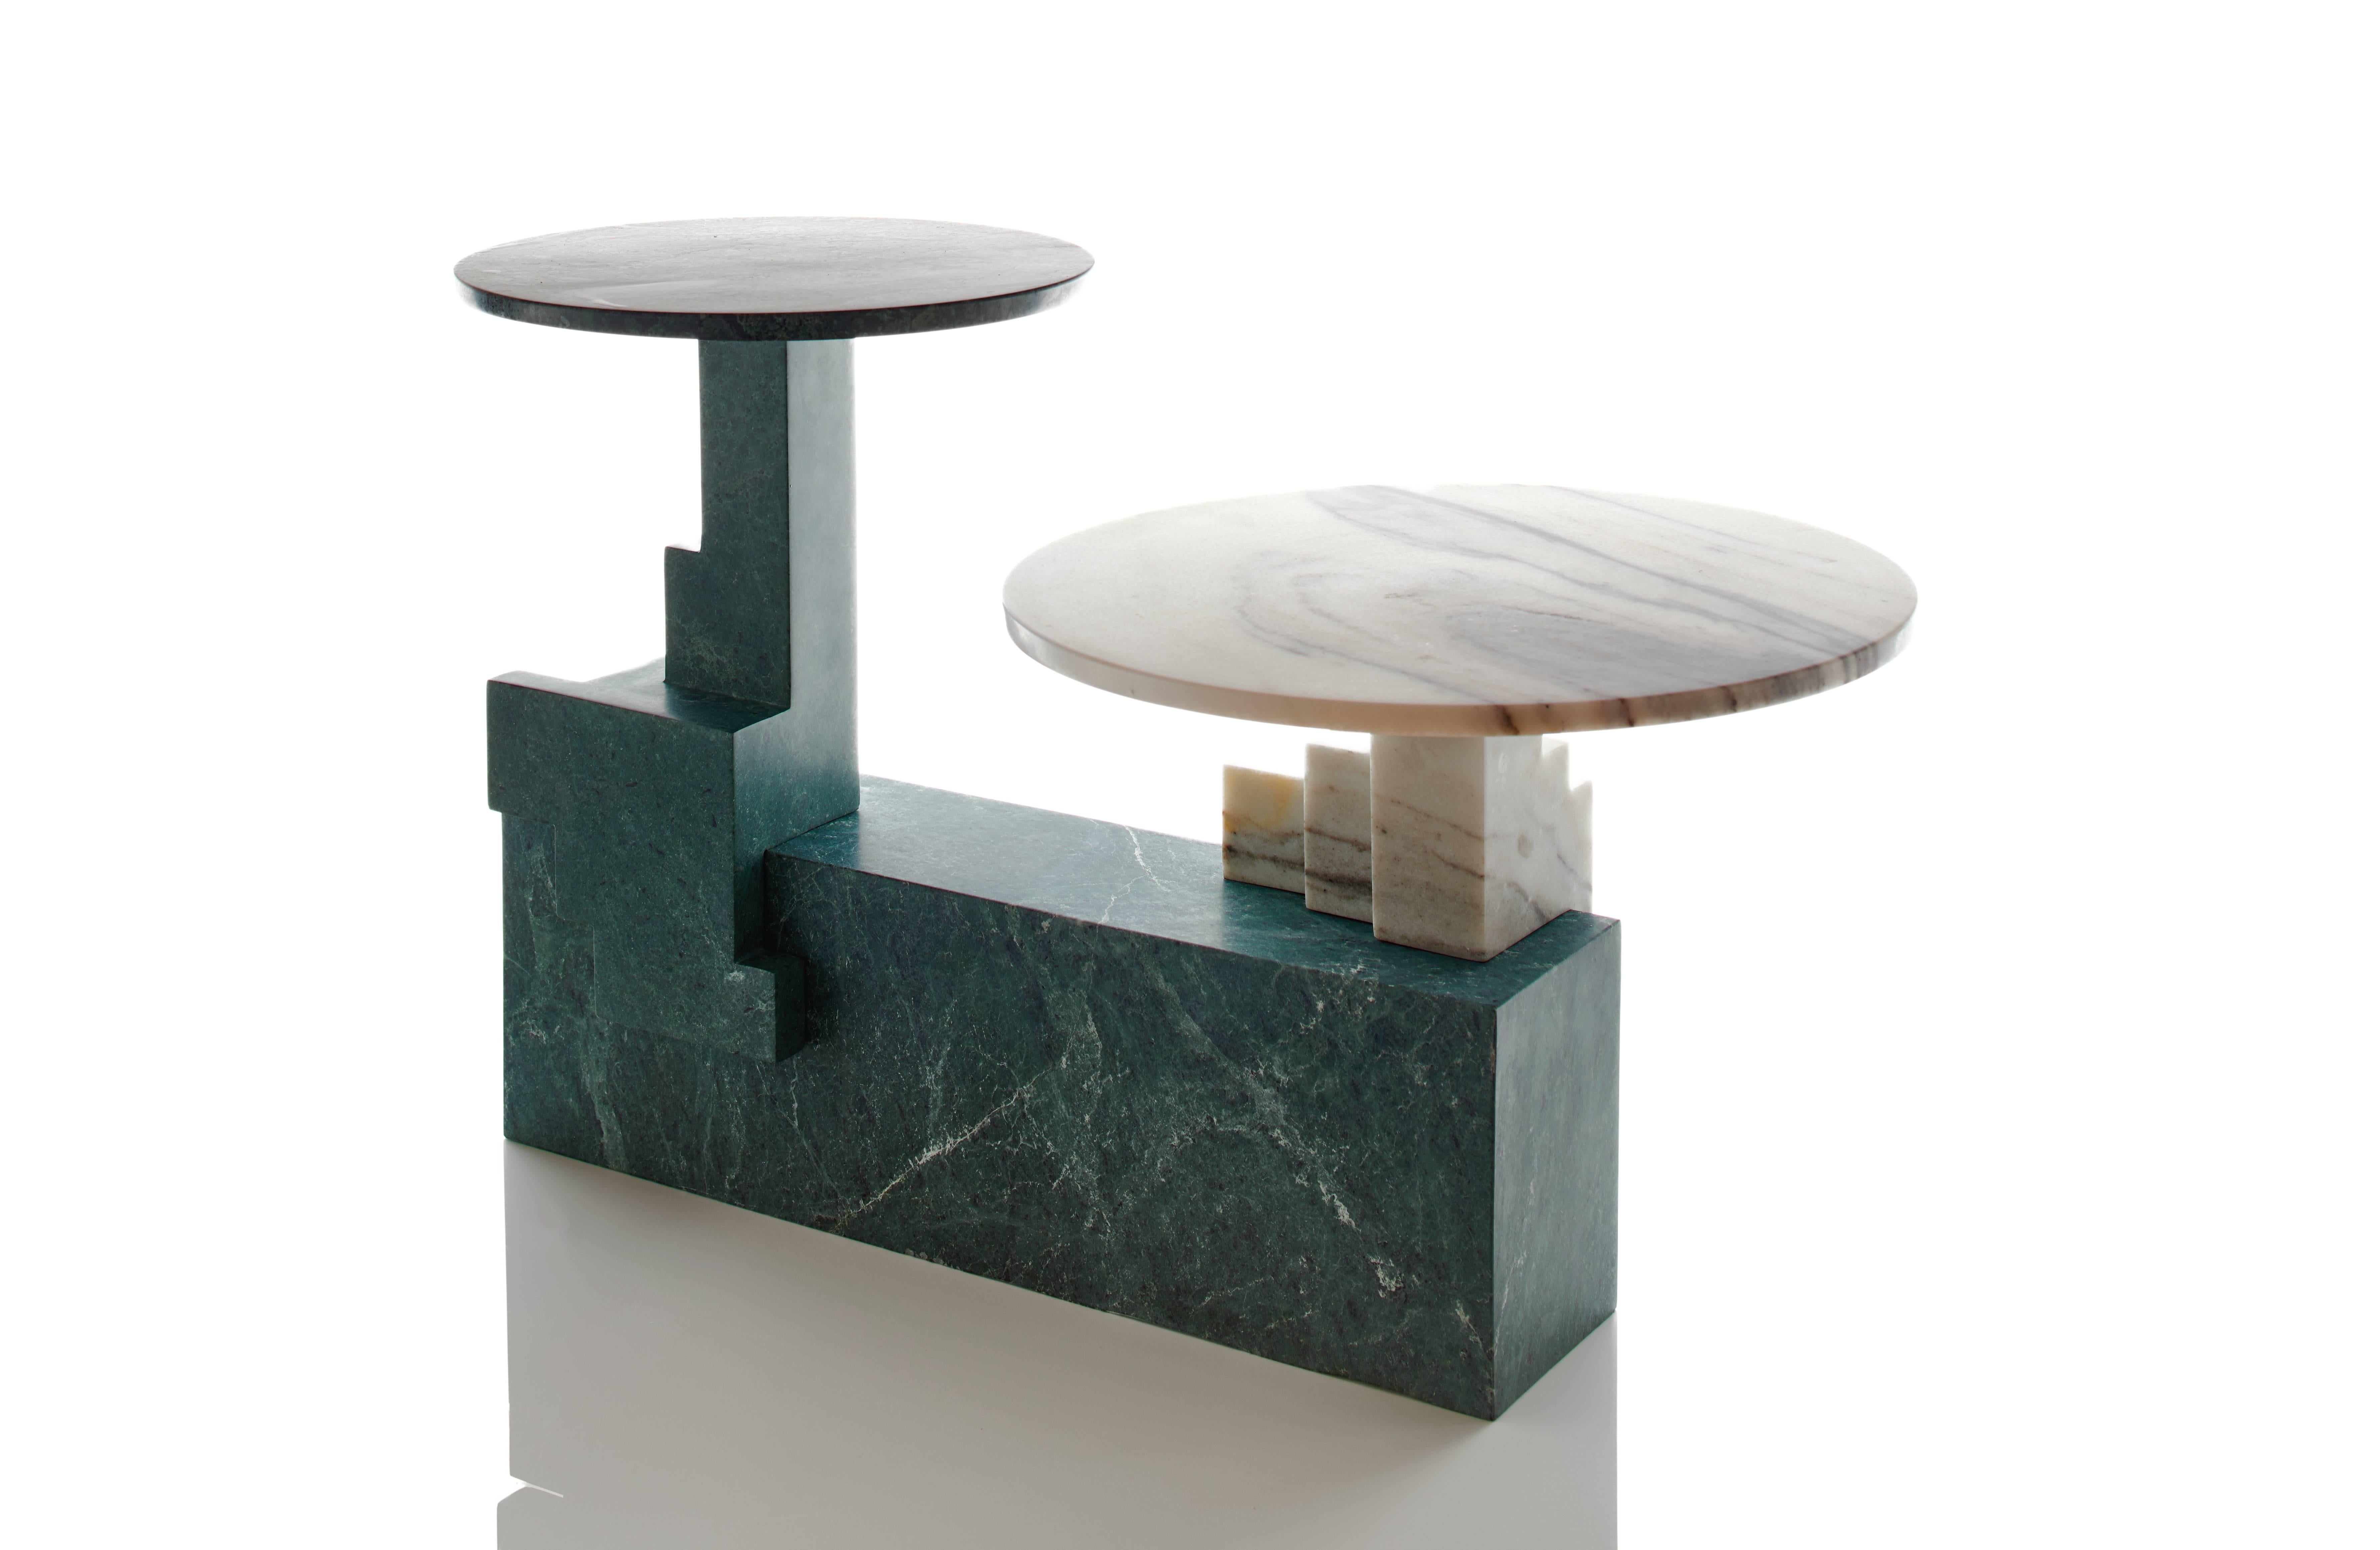 Off-cut three coffee table by Raw Material

Materials: moss green marble and mist white marble

Limited Edition of 8 + 4AP.